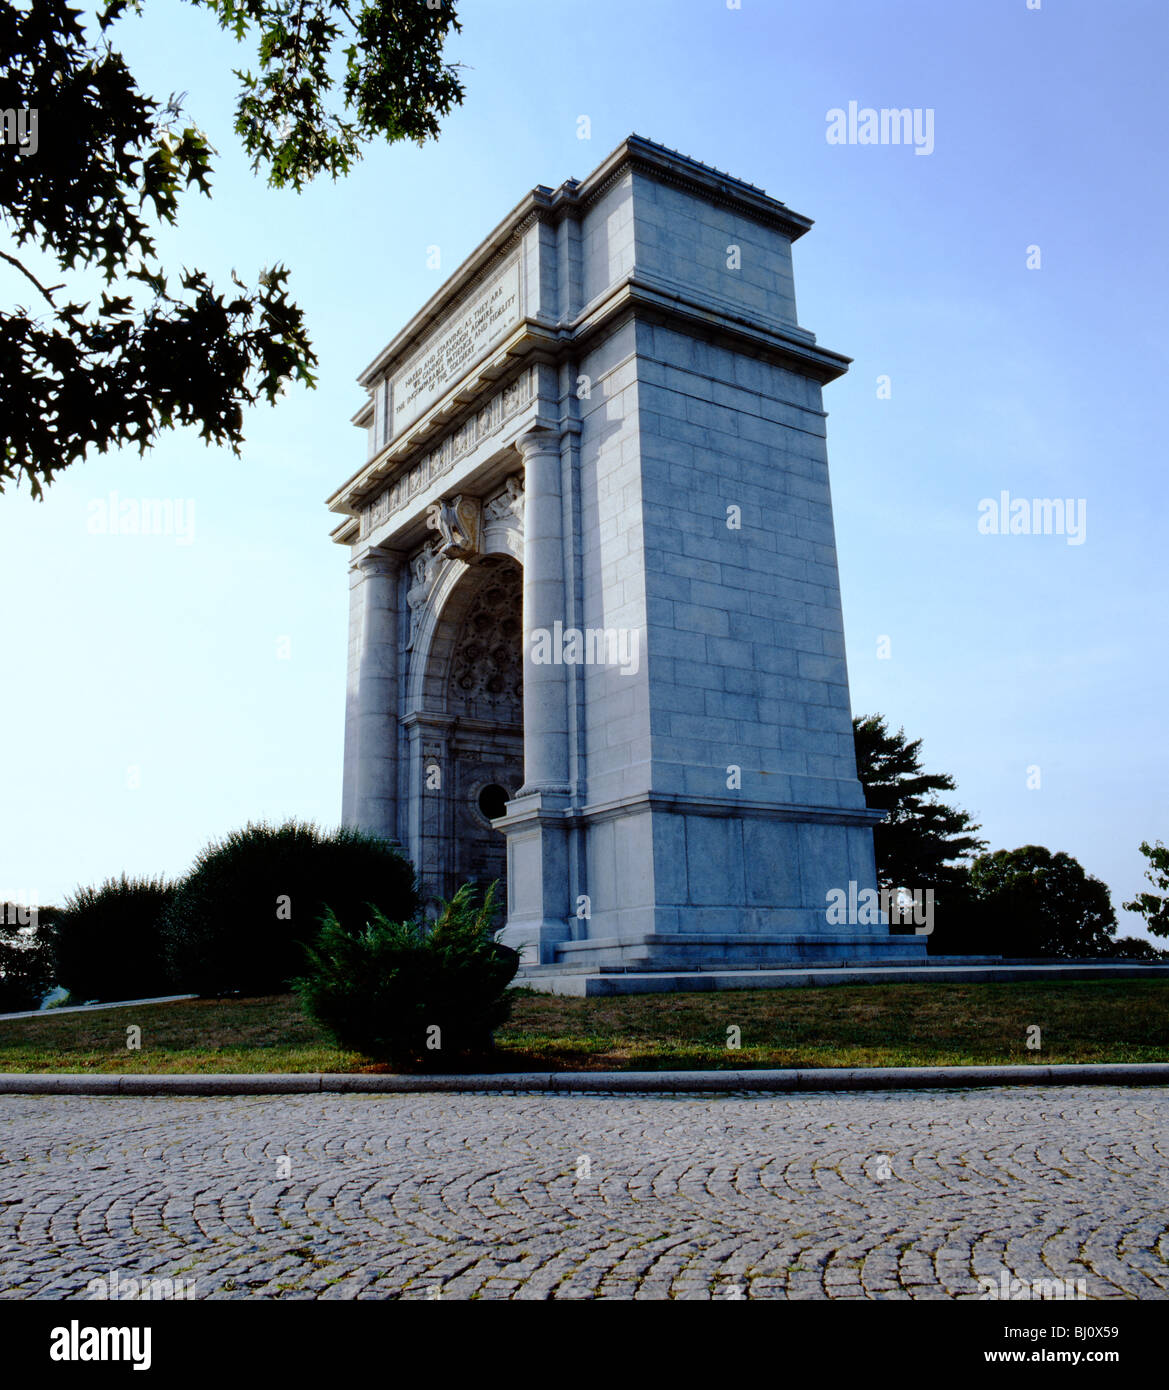 National Memorial Arch, Valley Forge National Historical Park, Valley Forge, Pennsylvania, USA Stockfoto